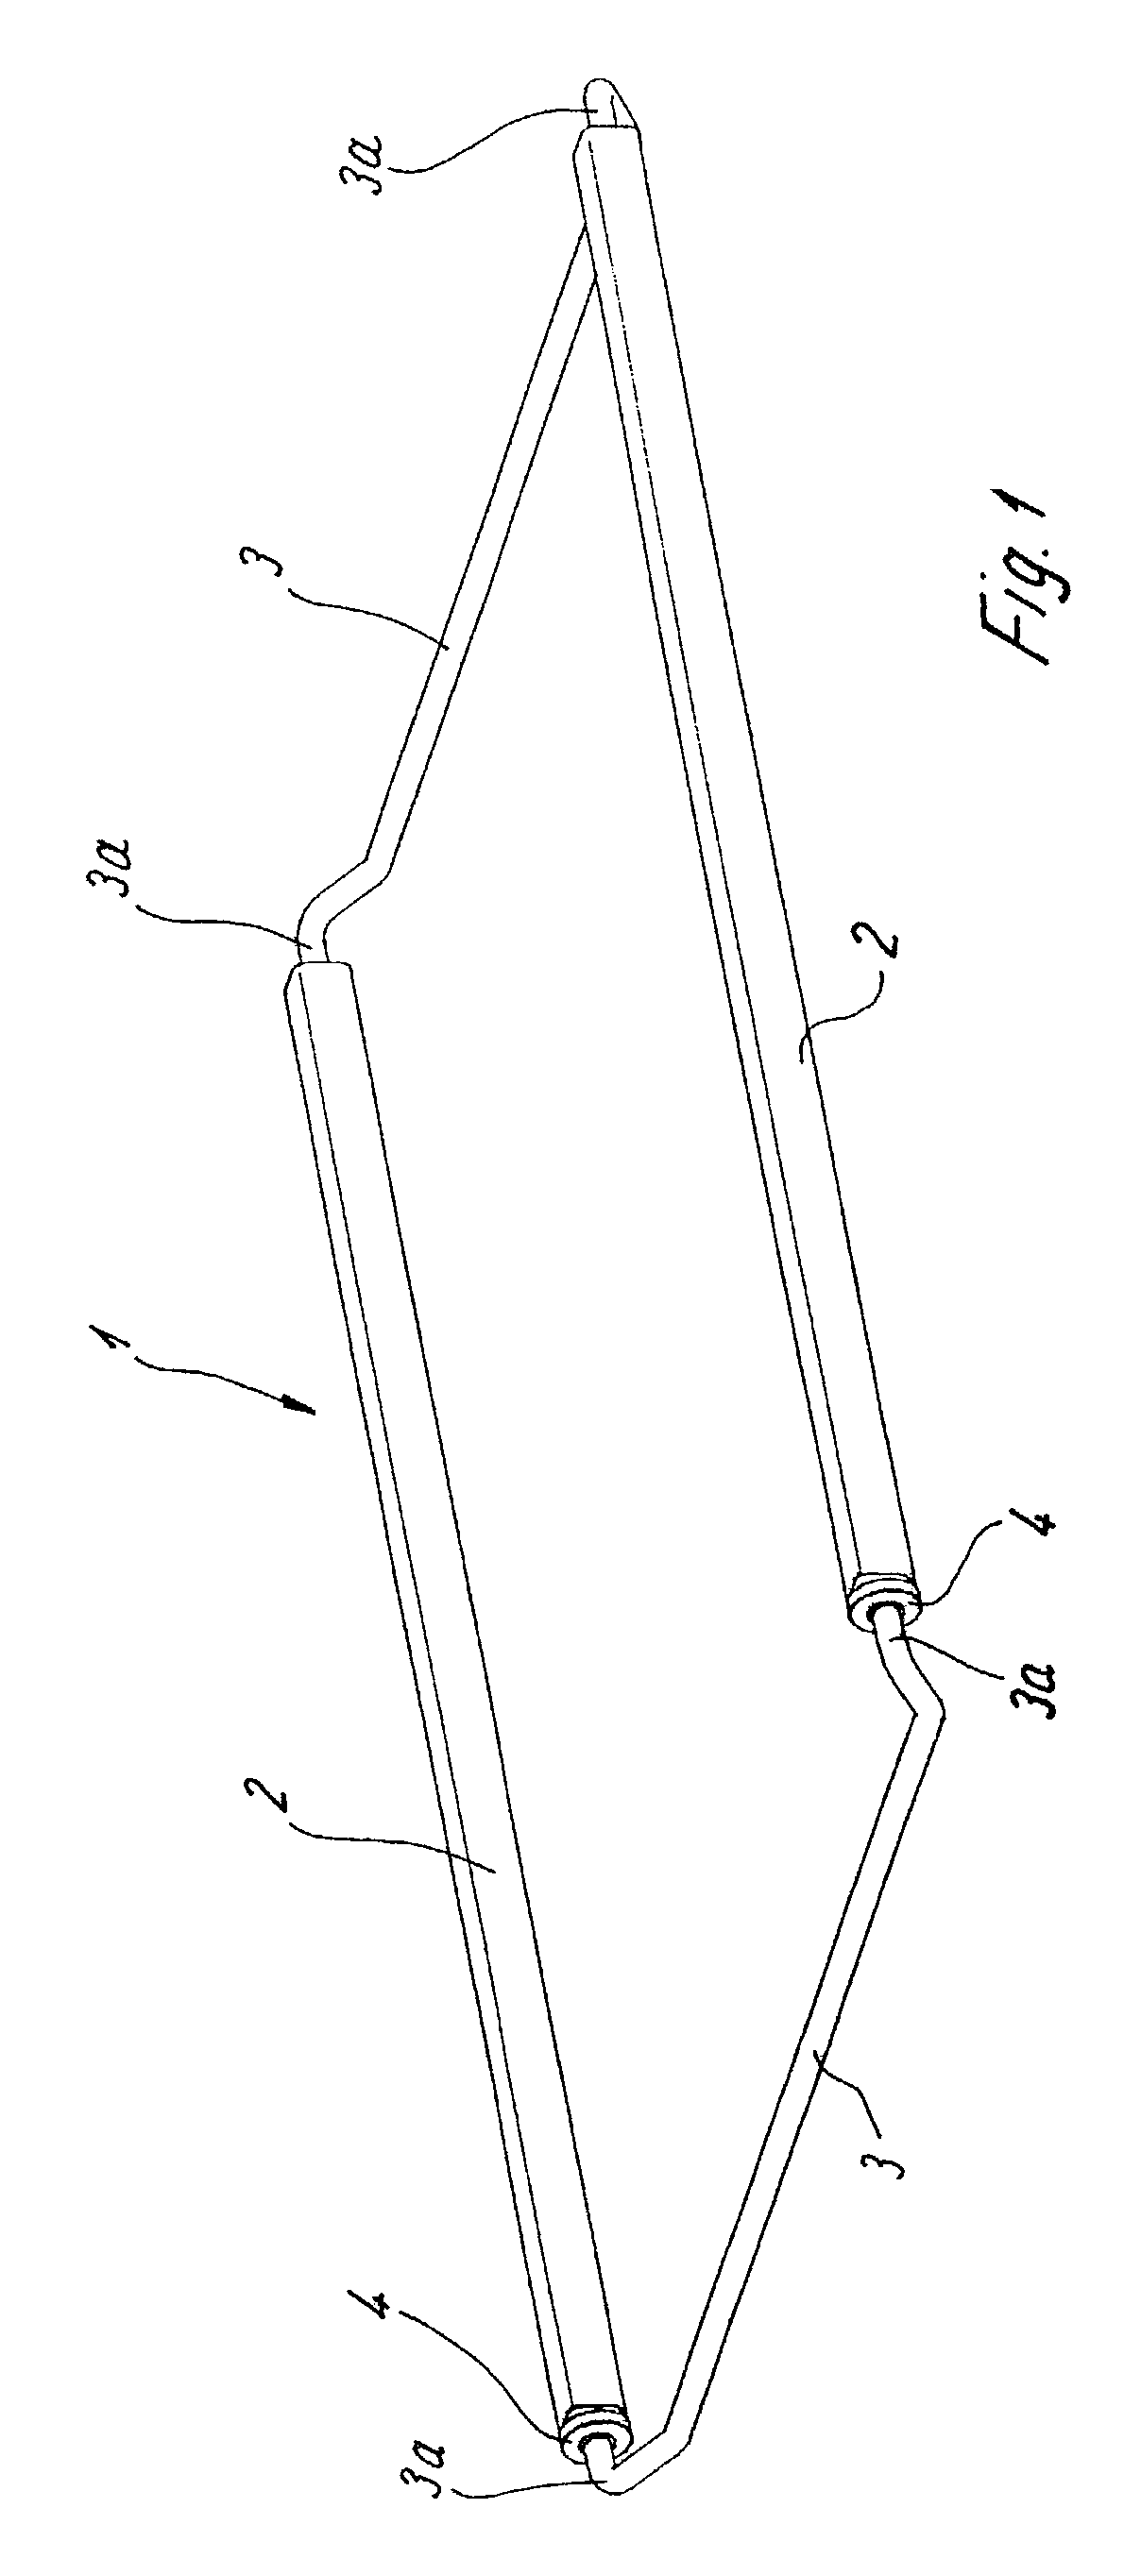 Width-adjustable carrier frame usable in household appliances, particularly in cooking and baking ovens